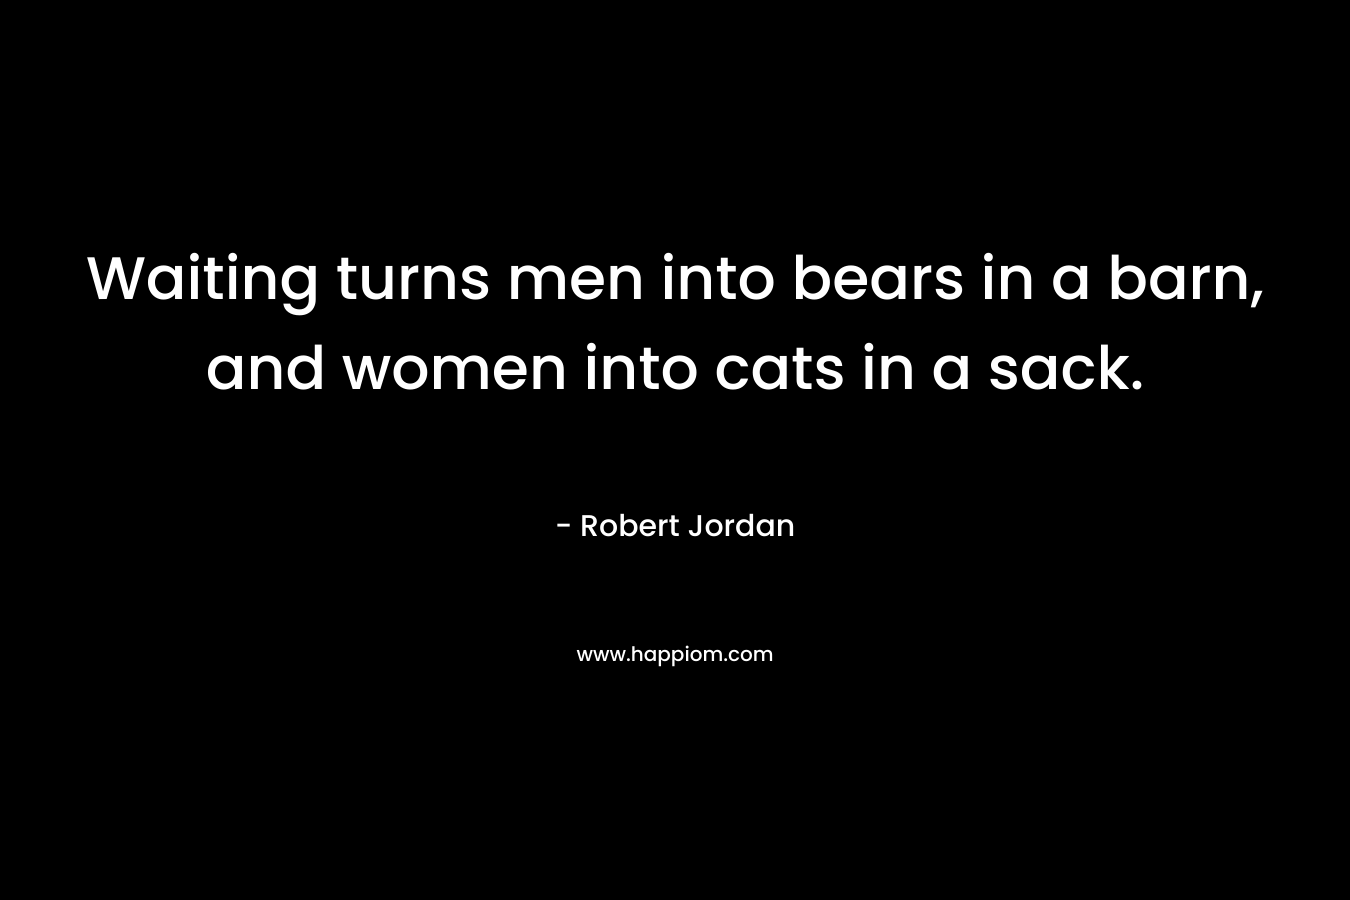 Waiting turns men into bears in a barn, and women into cats in a sack.